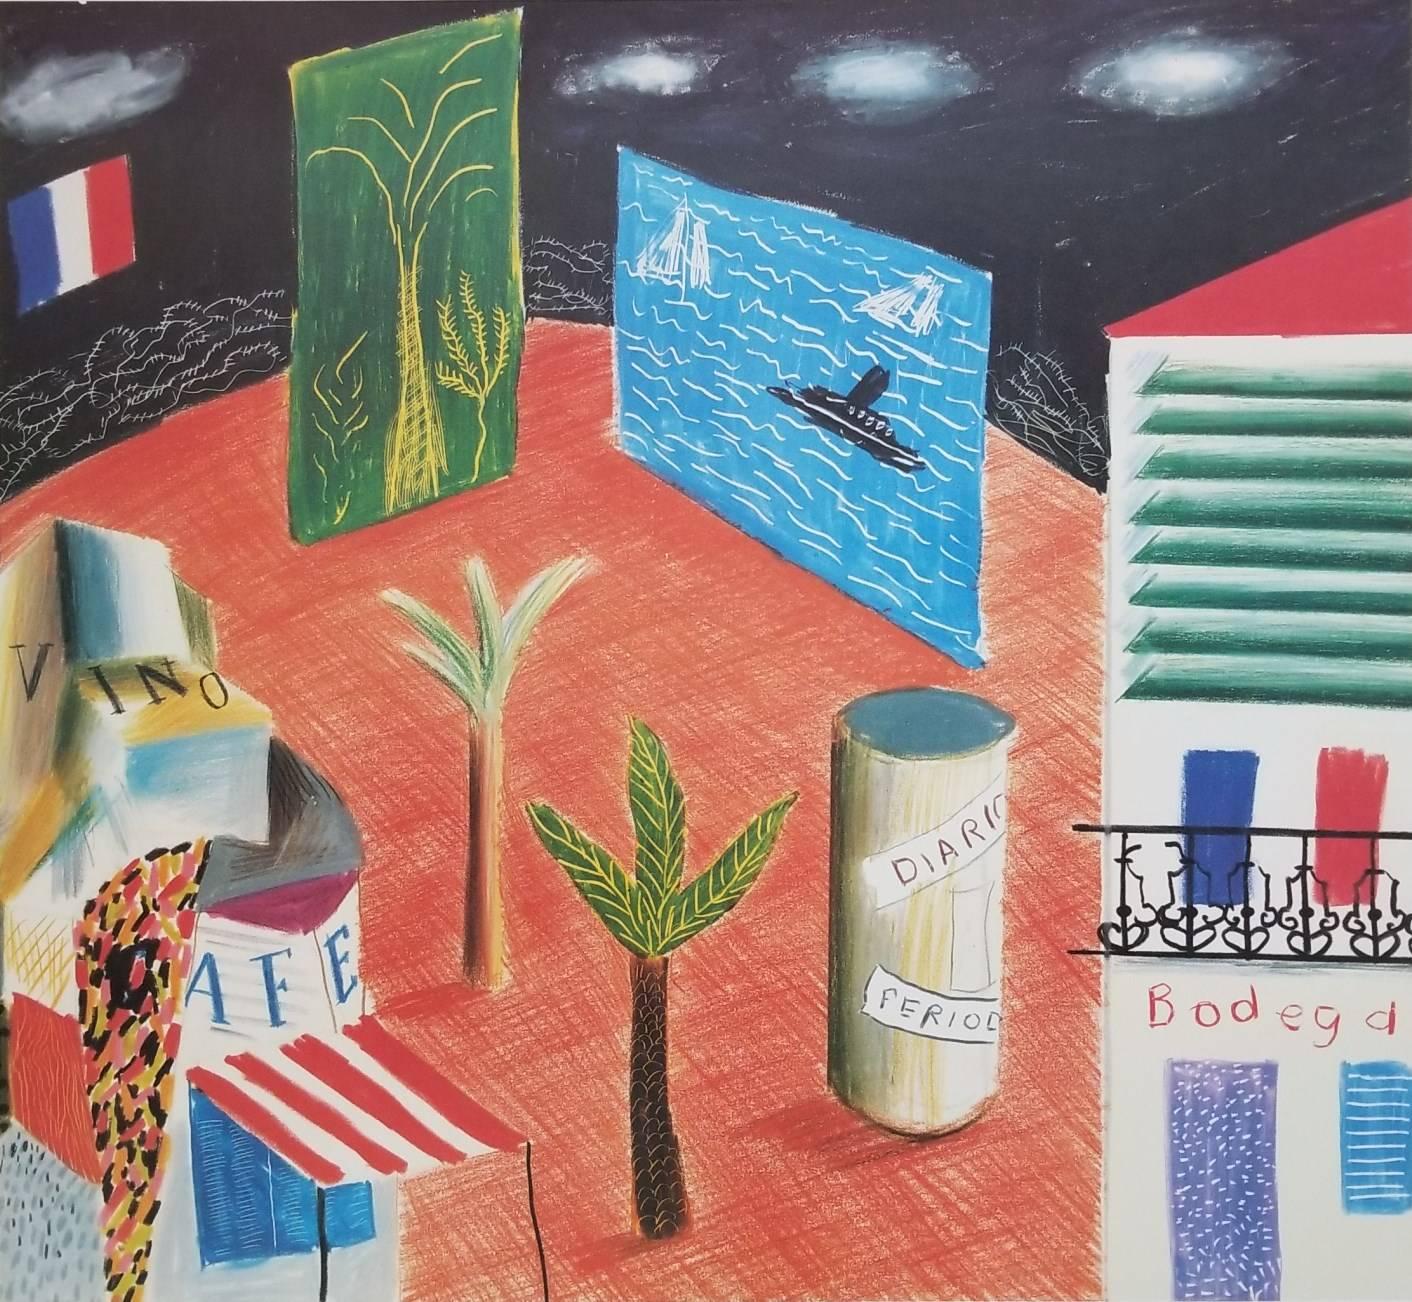 The New World Festival of the Arts (Signed) - Print by (after) David Hockney